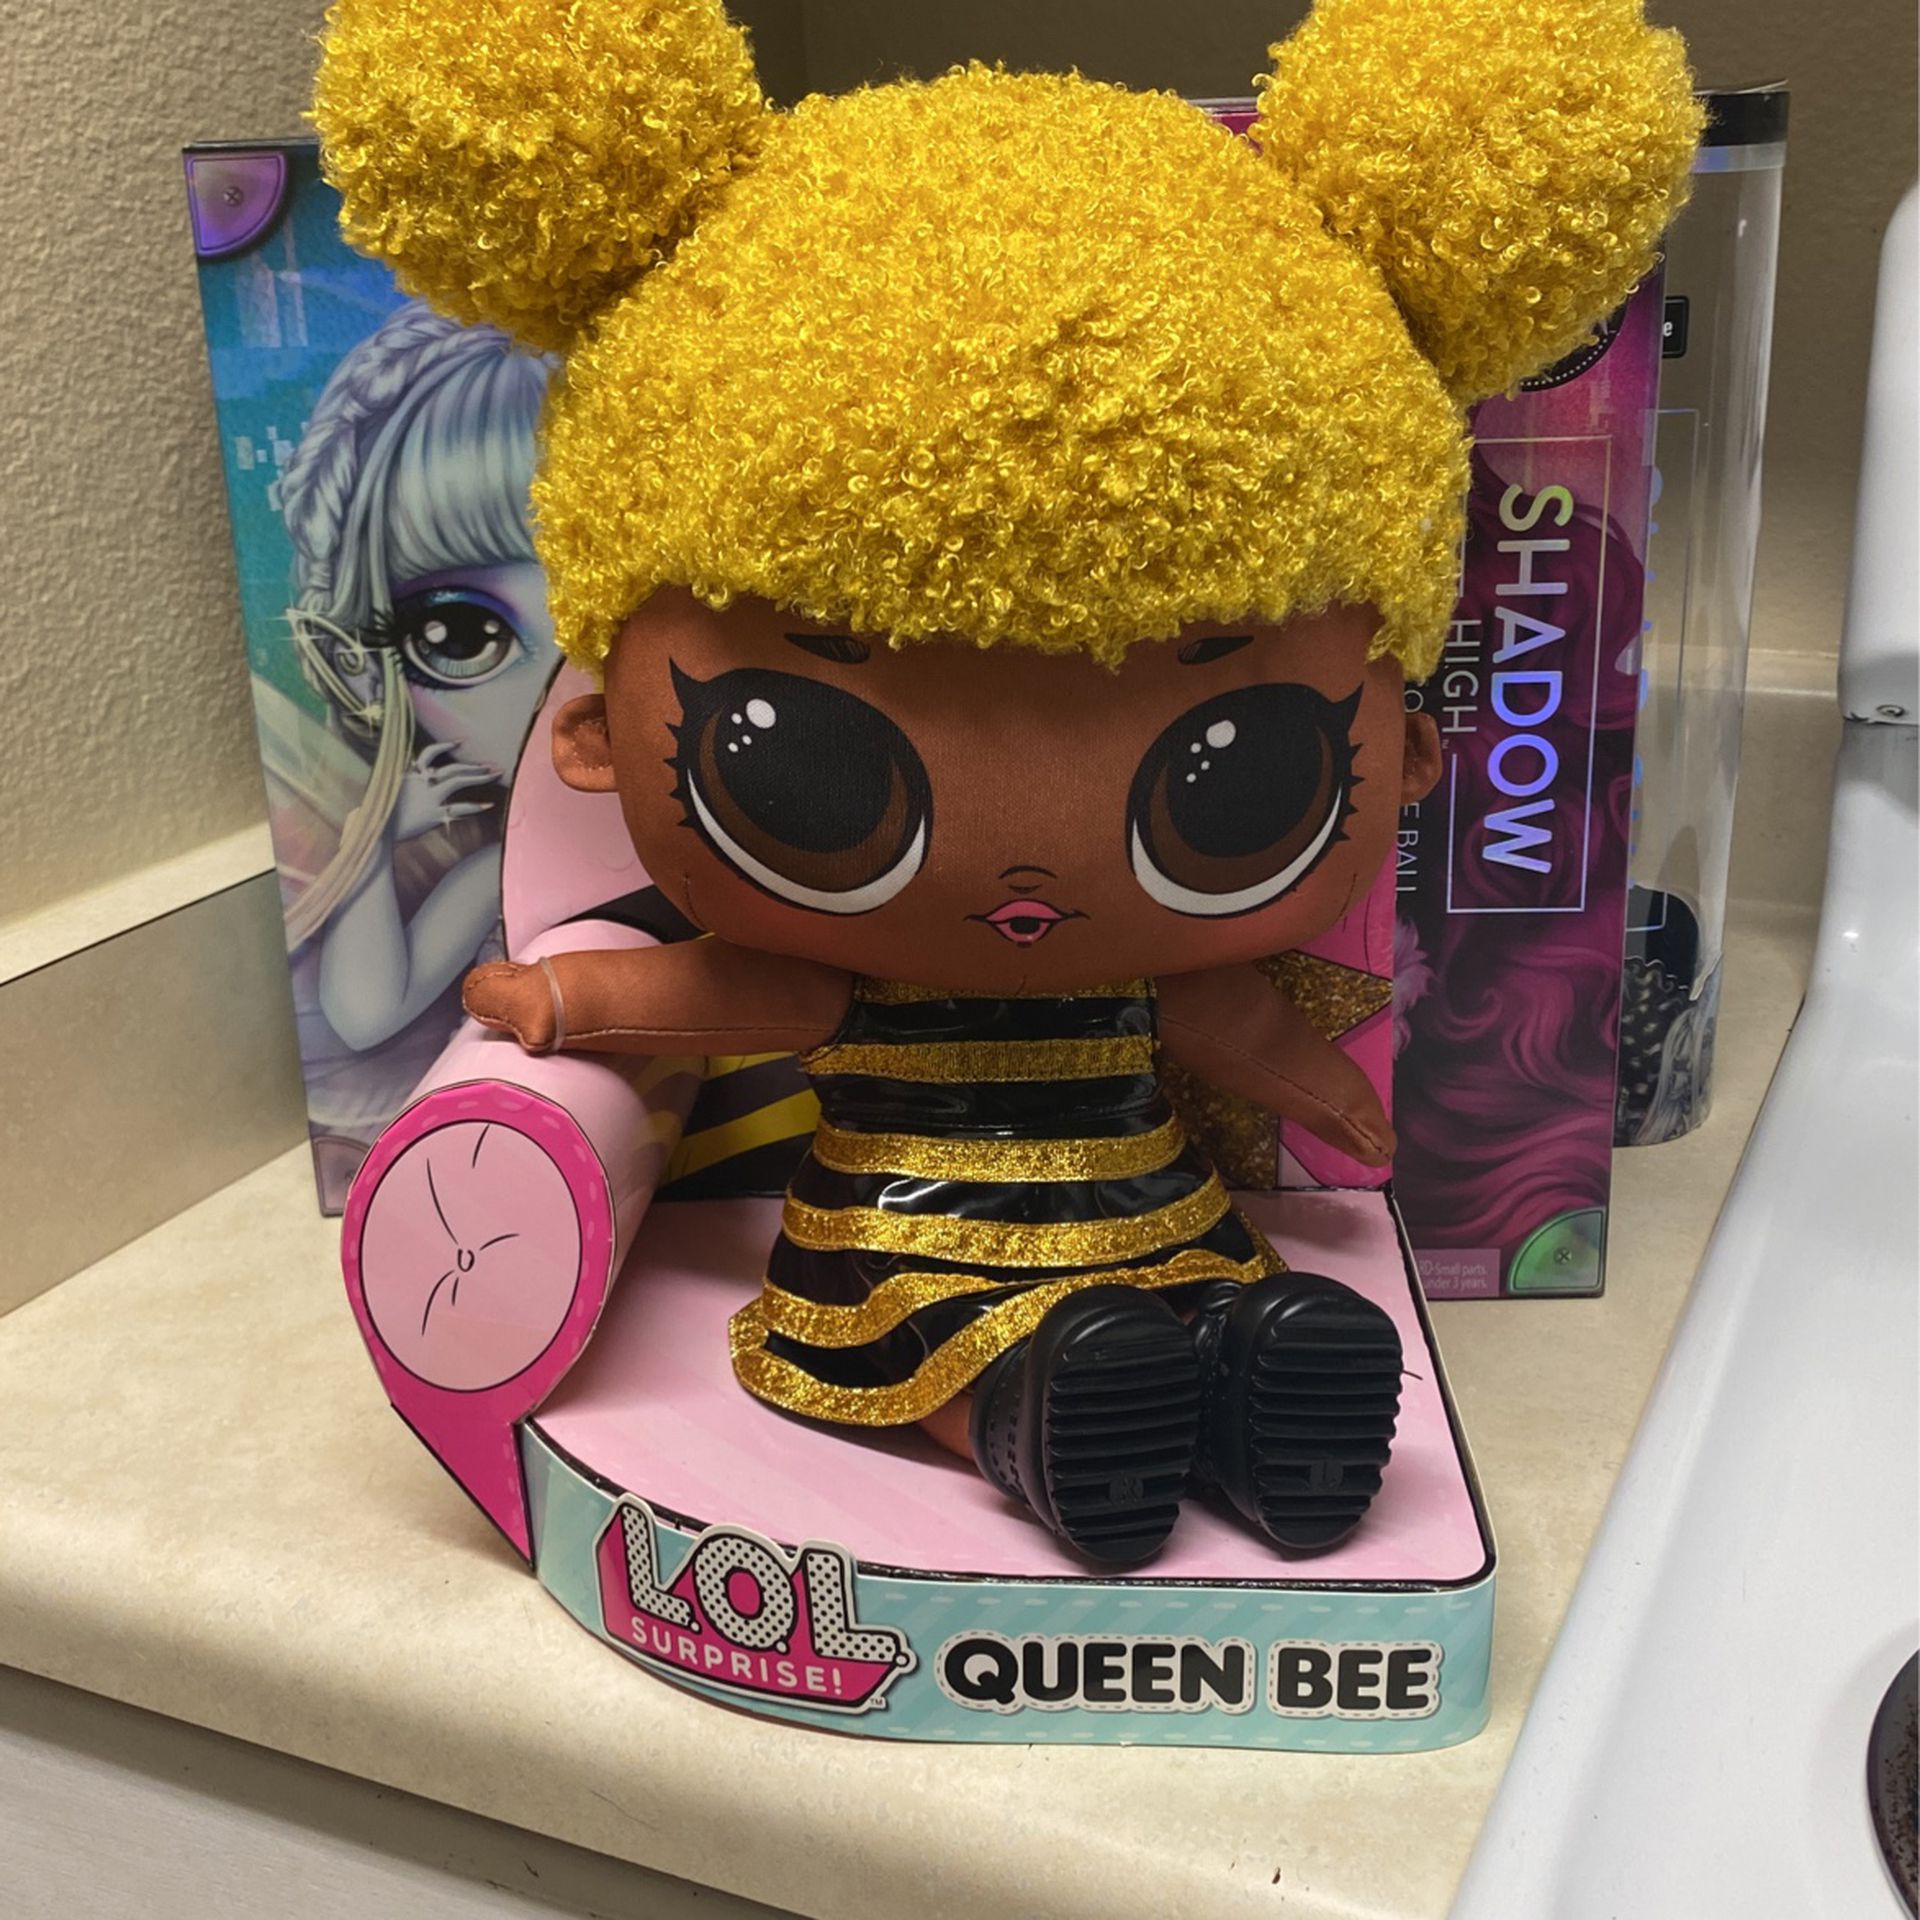 LOL Surprise Queen Bee Doll/plushie